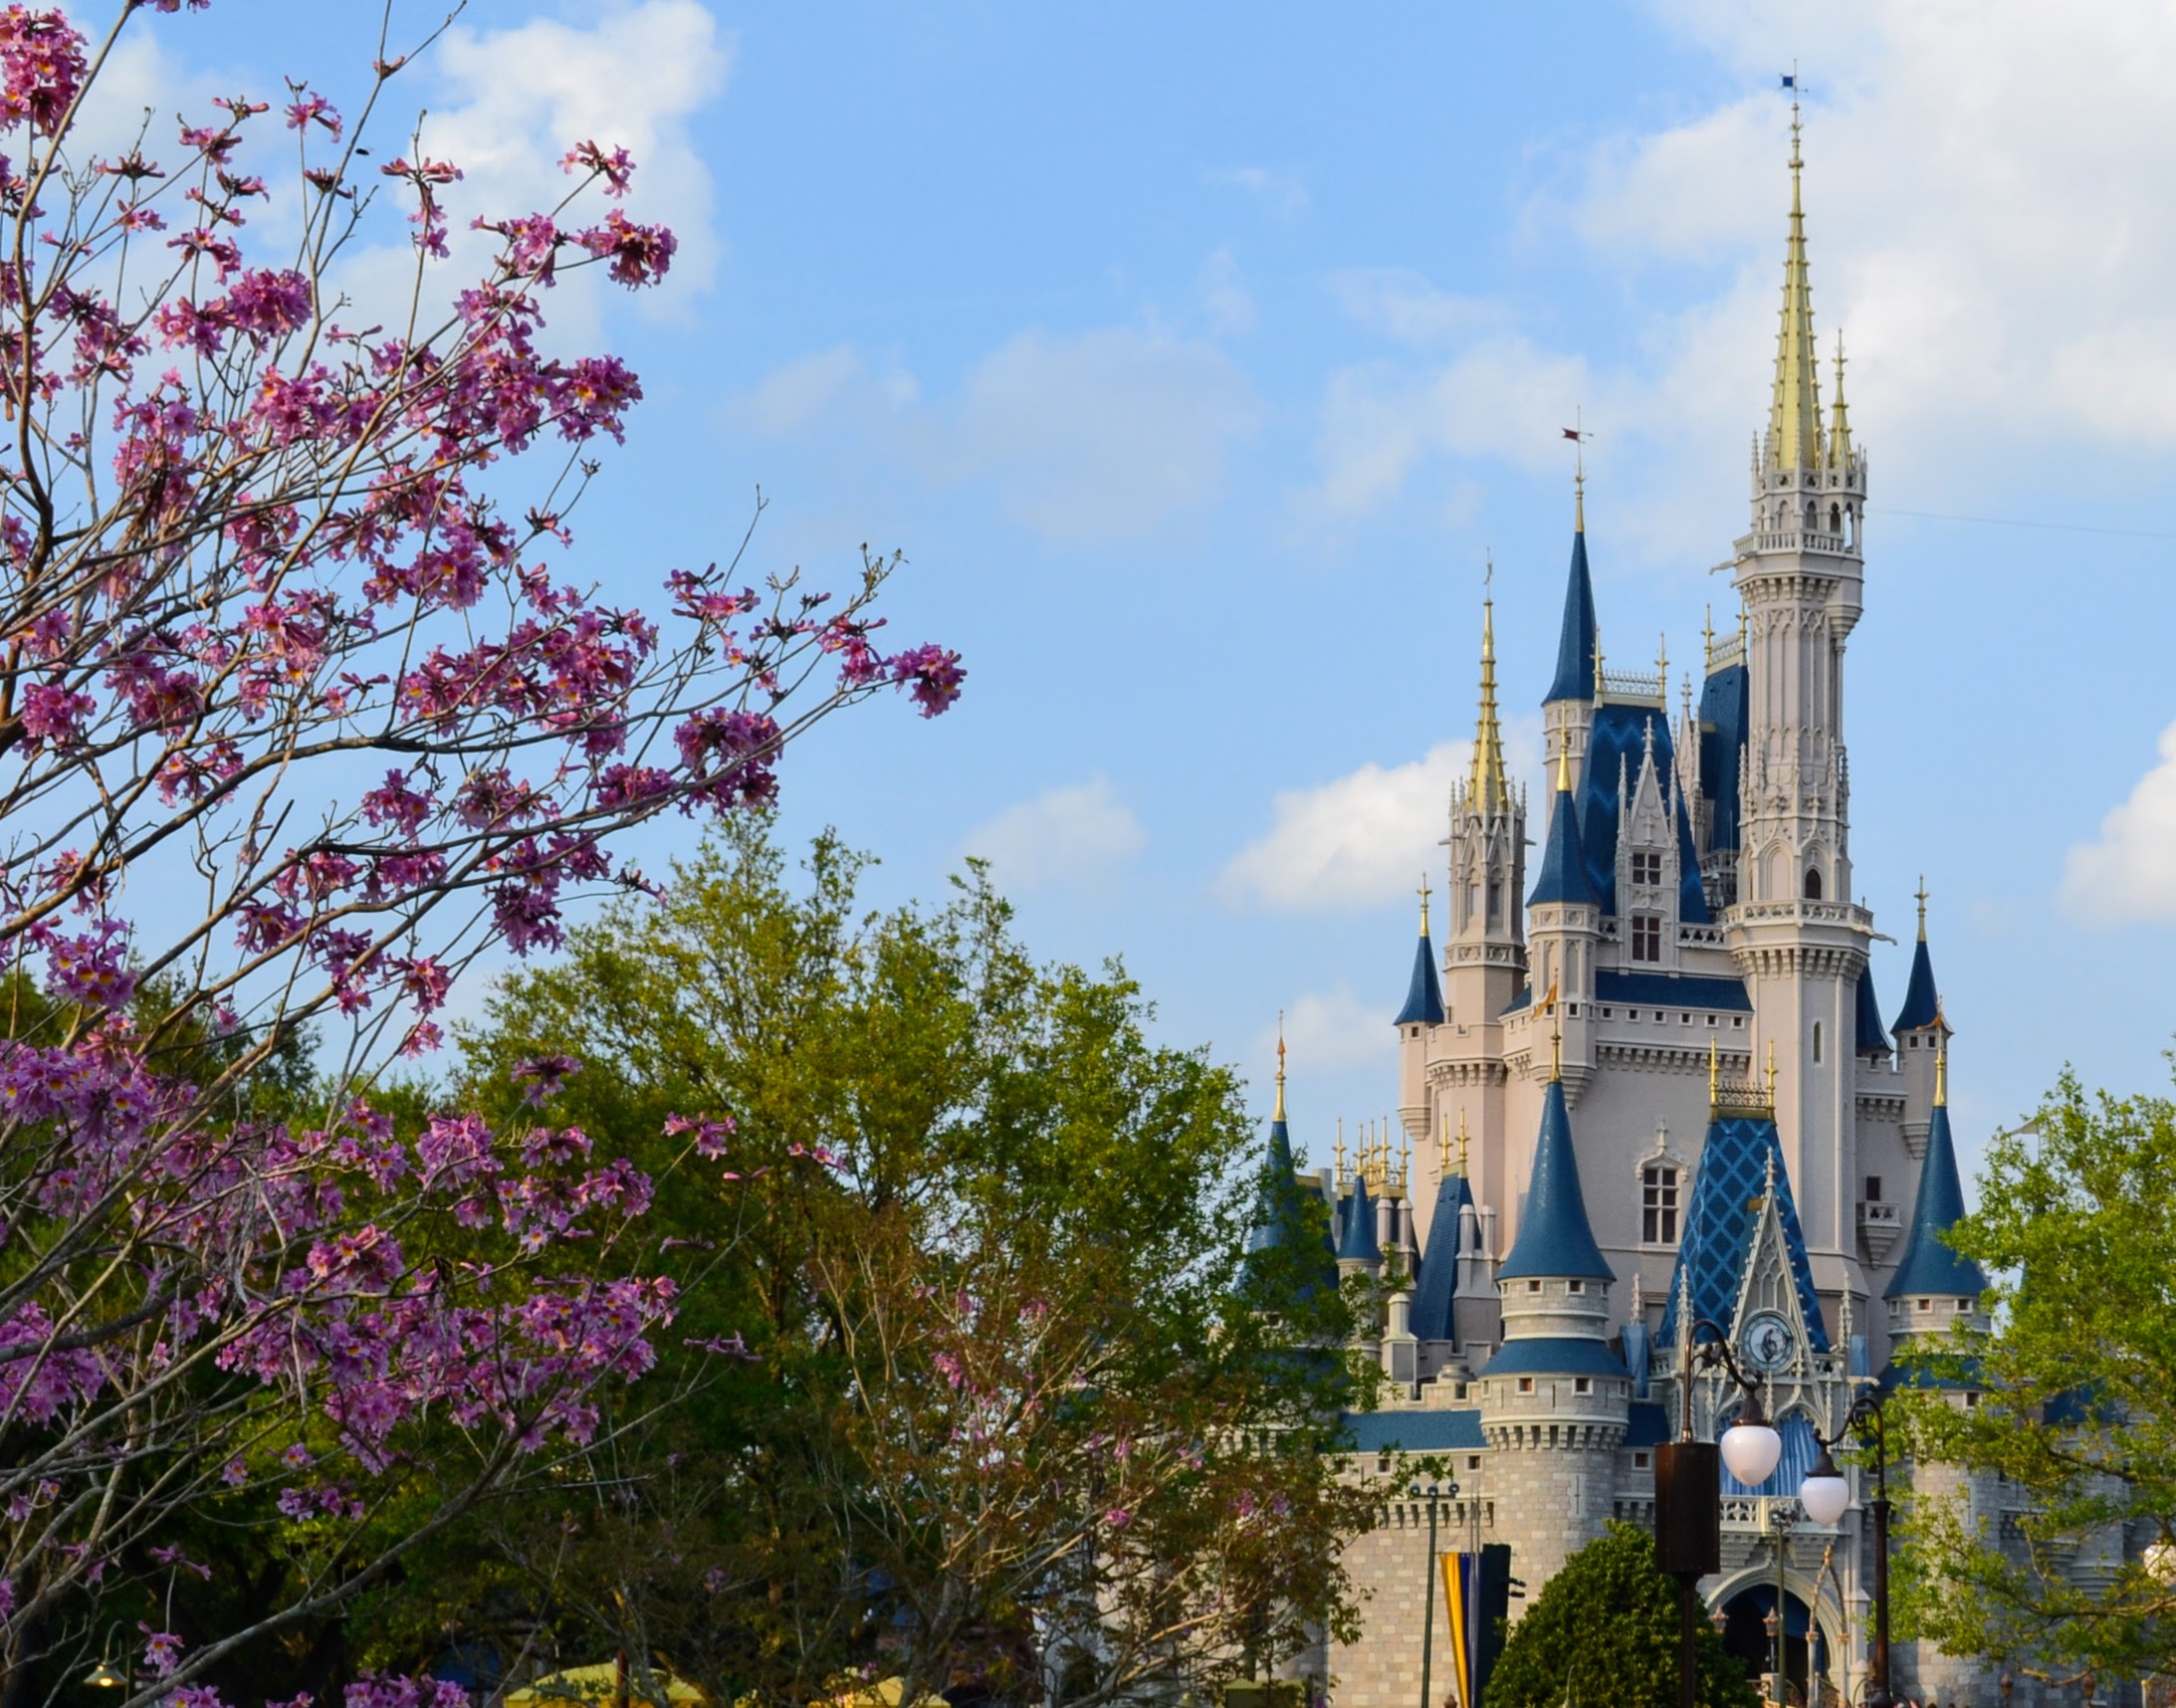 How to tour Magic Kingdom (without waiting in lines)